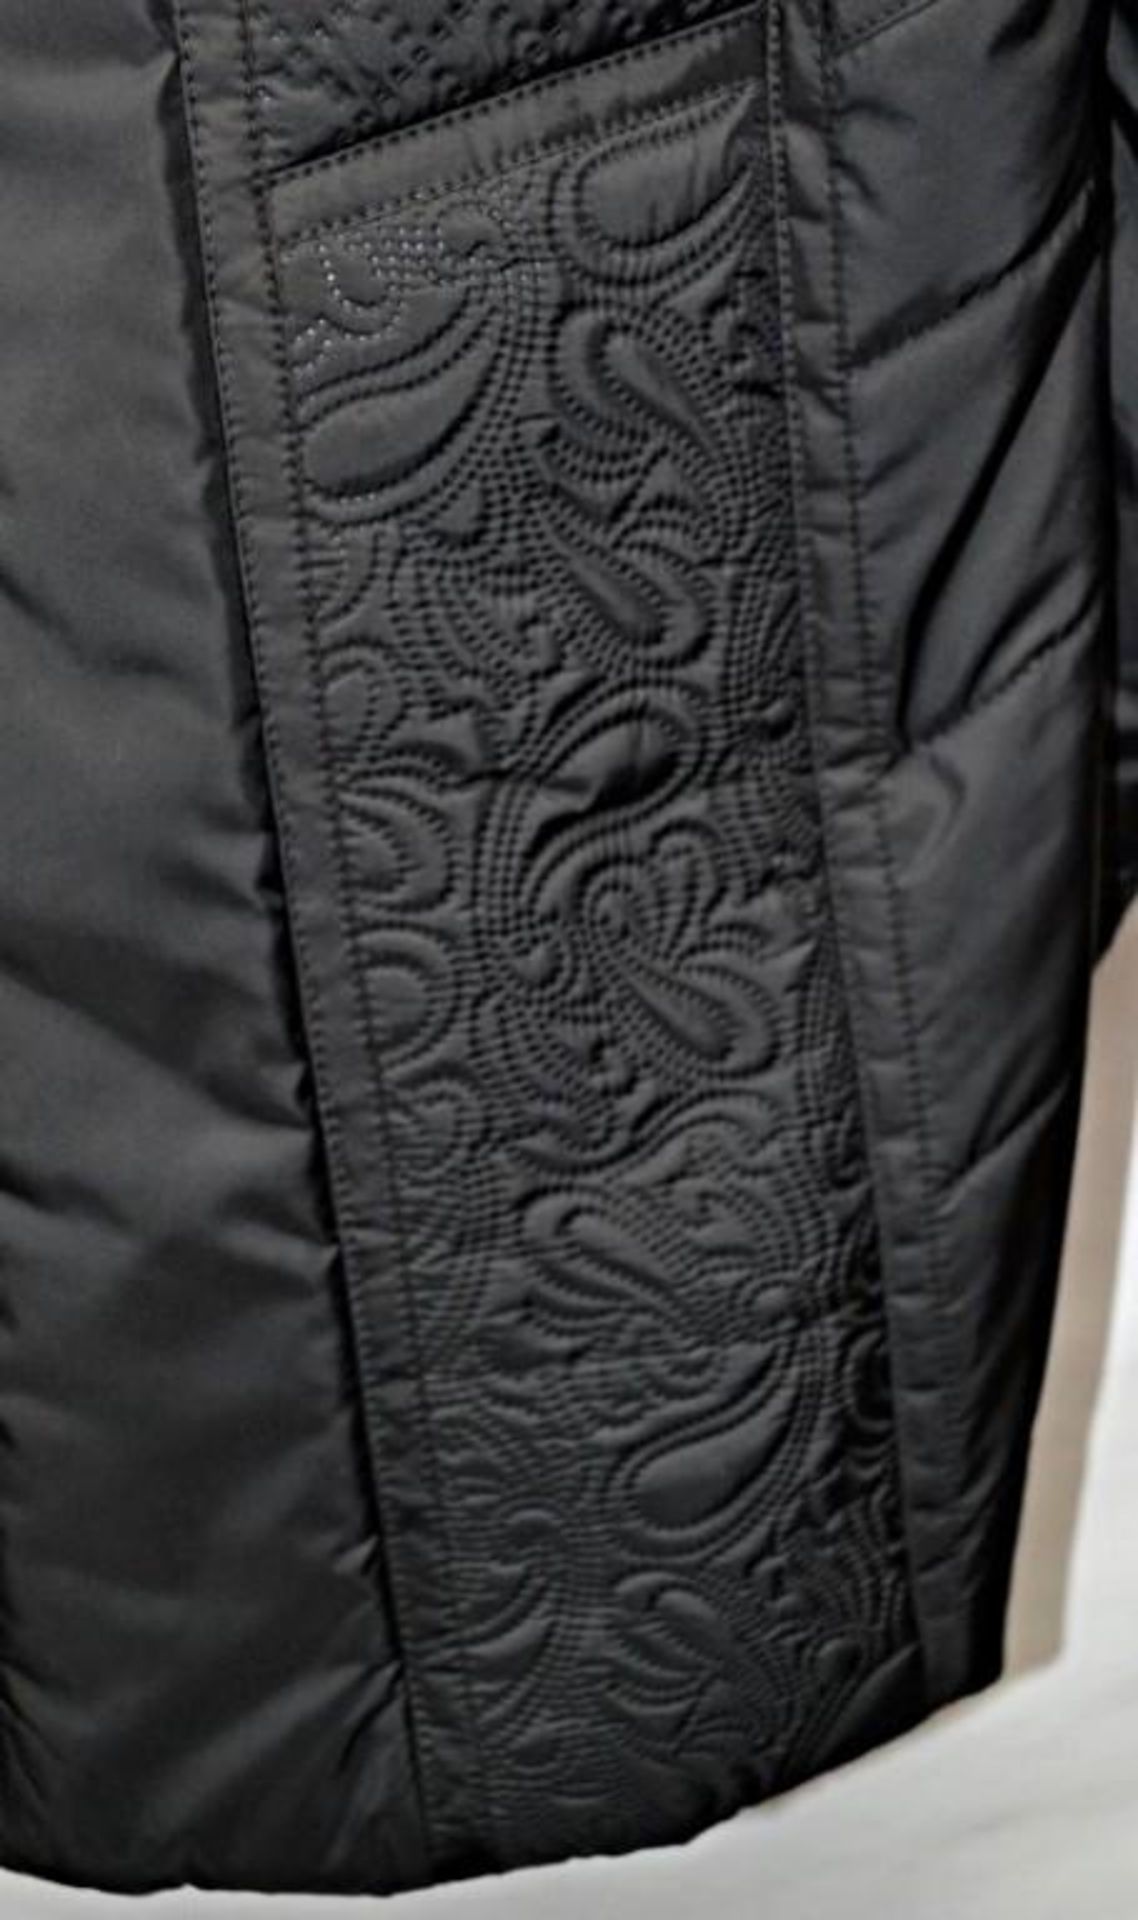 1 x Steilmann Womens Quilted Winter Coat In Black With Attractive Paisley-style Panels - UK Size 12 - Image 2 of 5